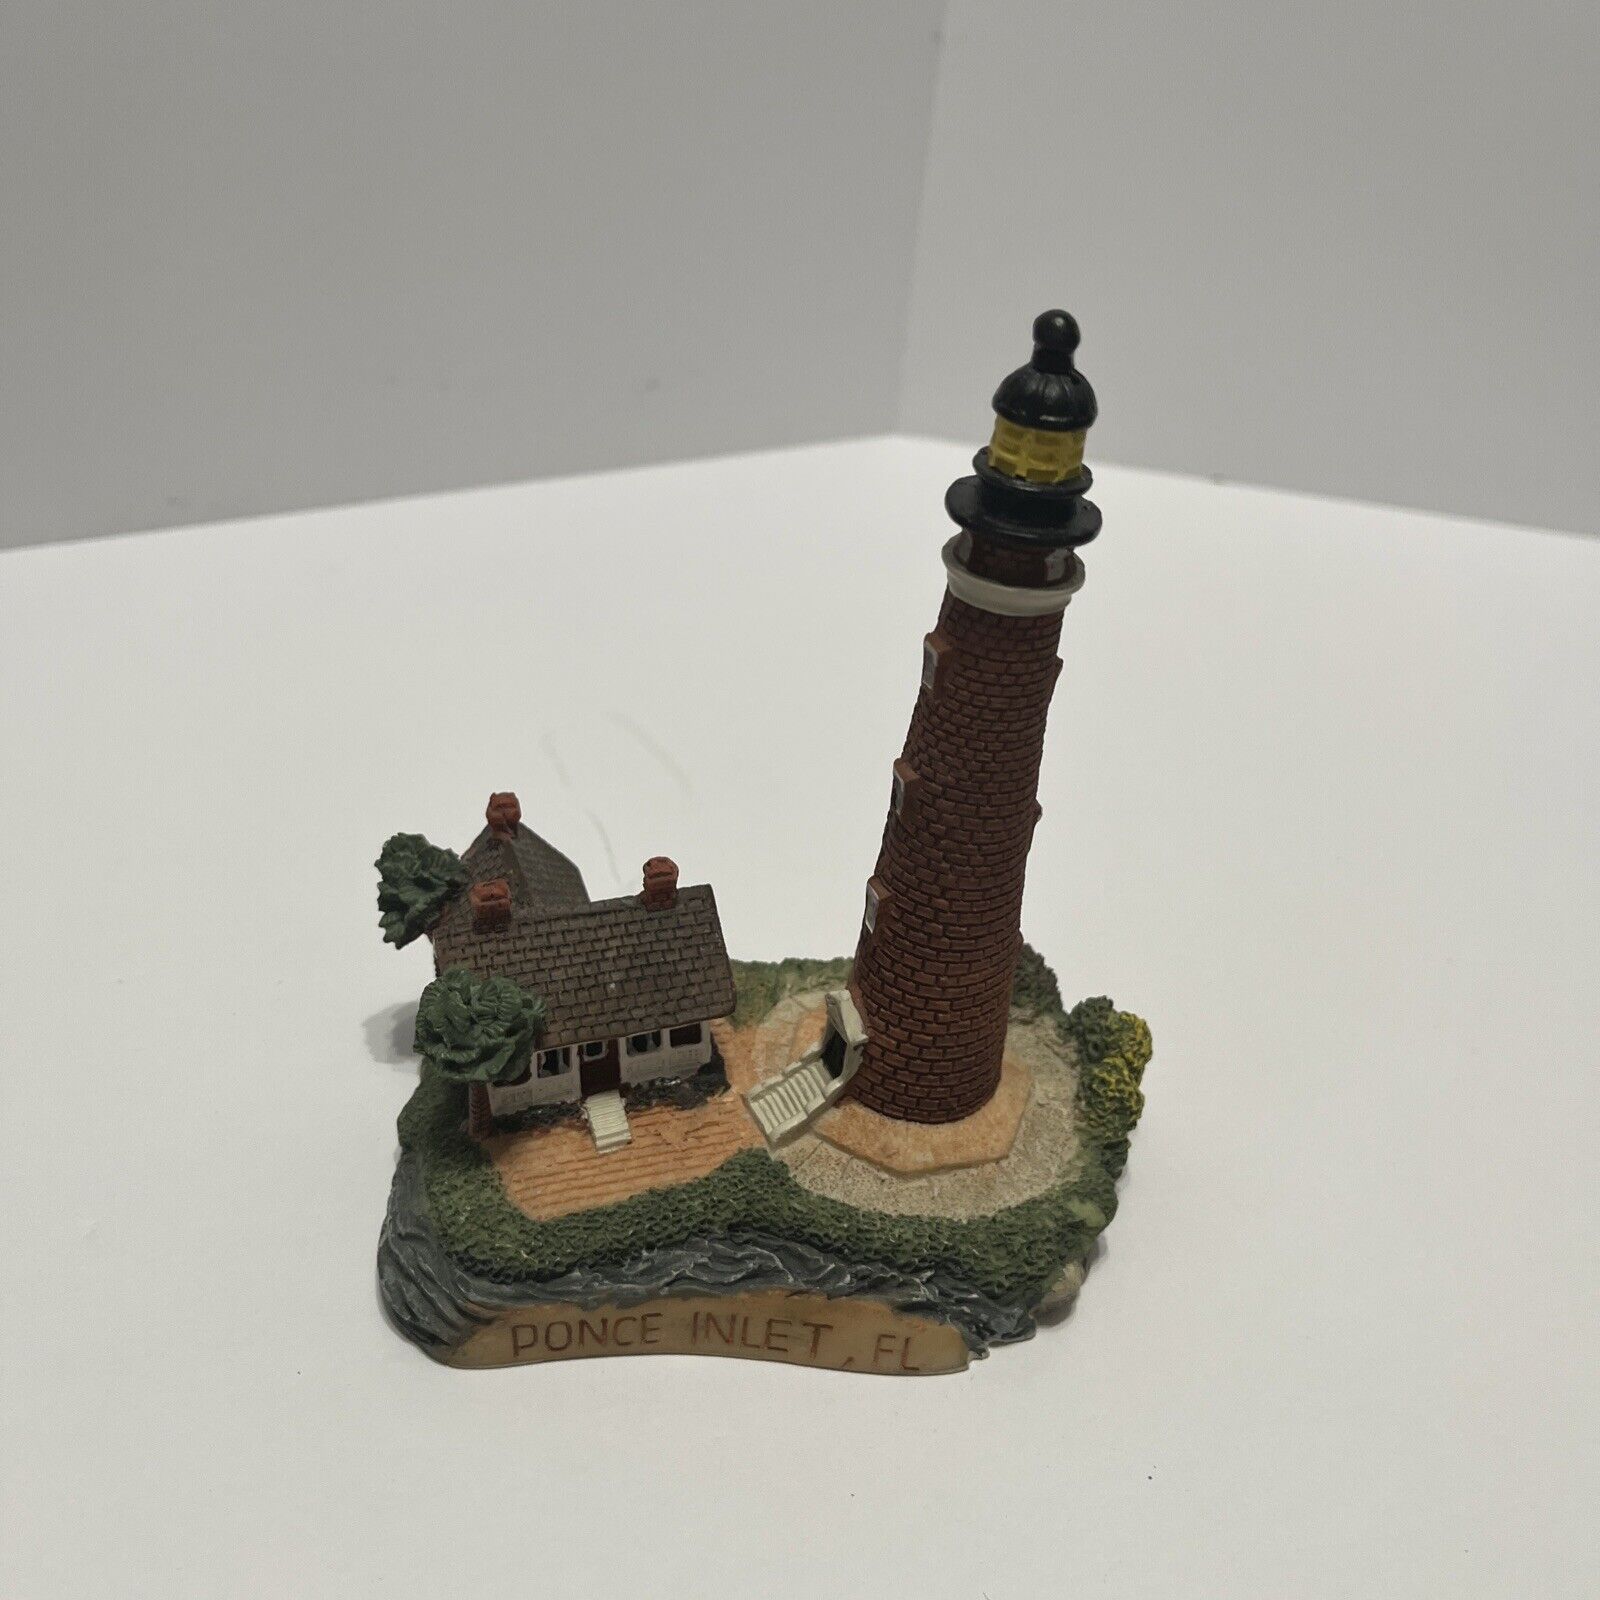 Ponce Inlet, FL Miniature Lighthouse By Golder Image, Gifts & Souvenirs